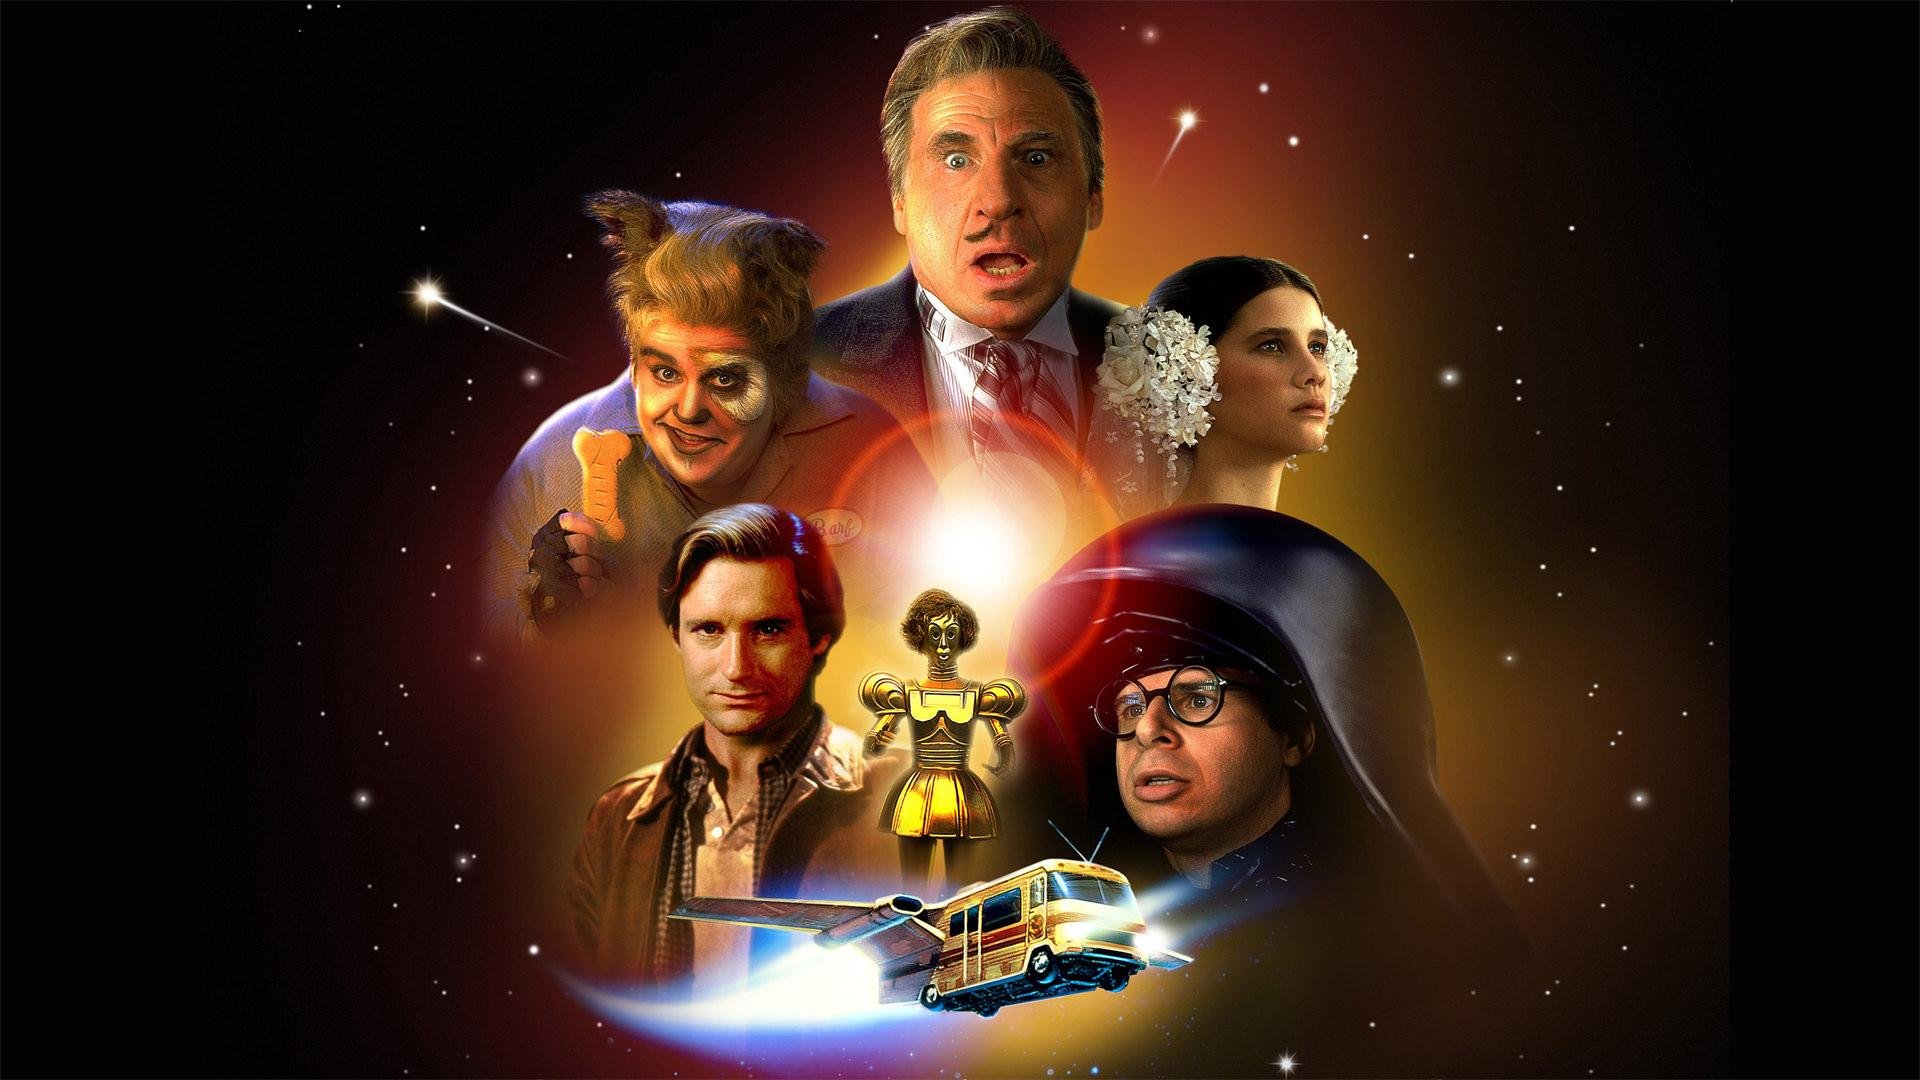 Download full hd 1920x1080 Spaceballs PC background ID:160764 for free